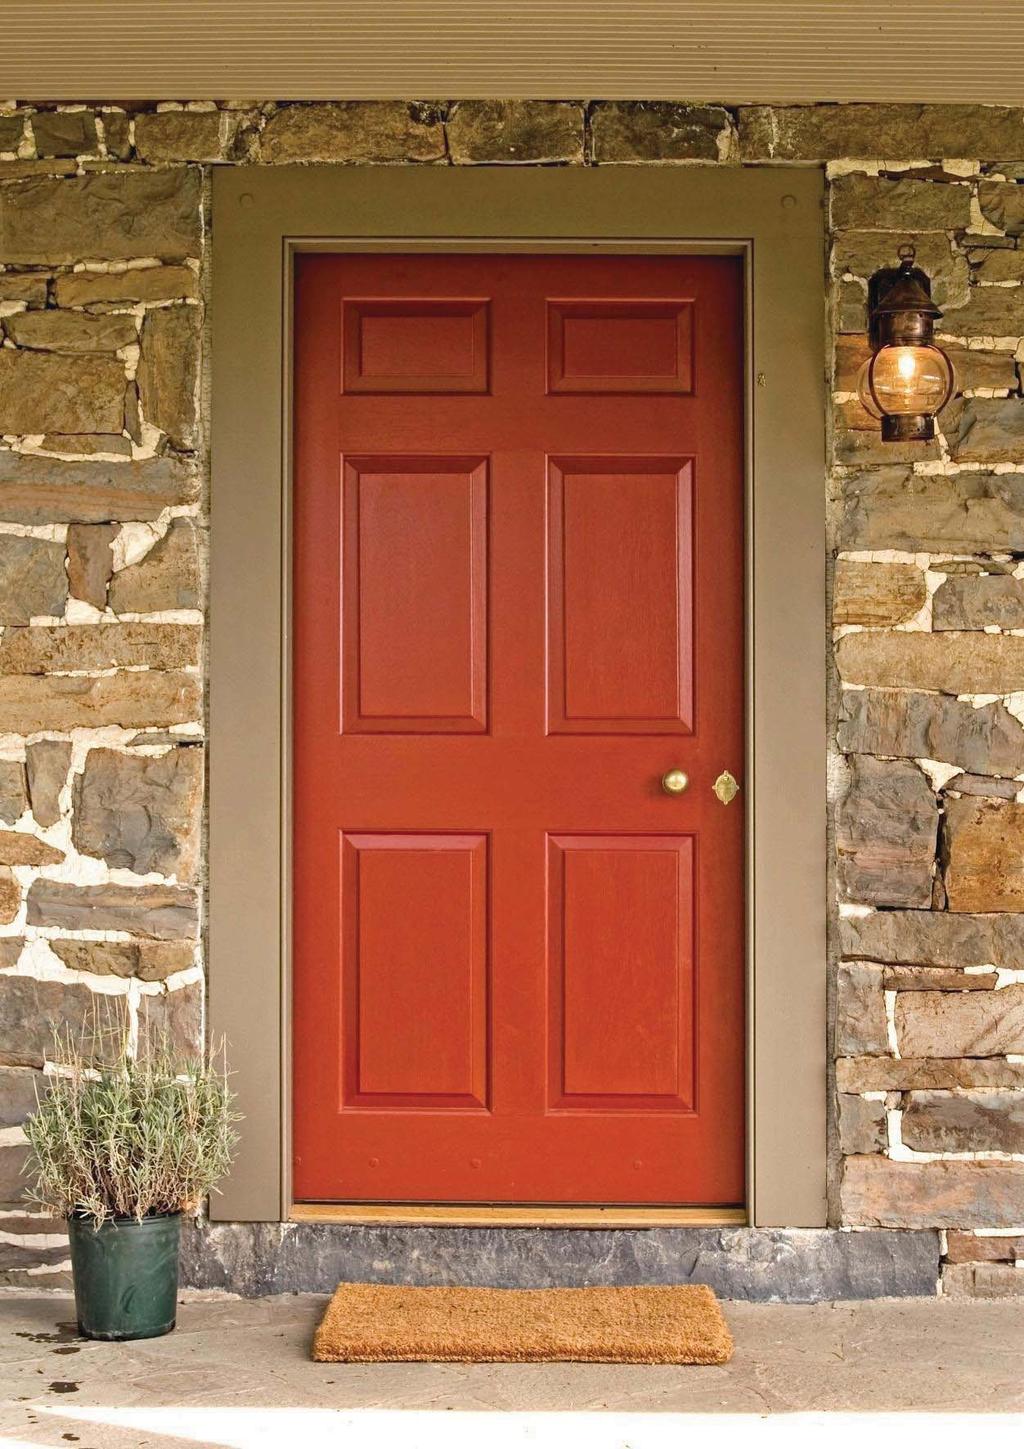 EXTERIOR DOORS Our exterior doors are built with the finest materials and attention to detail. Our typical material choice is Honduras mahogany or Spanish cedar.